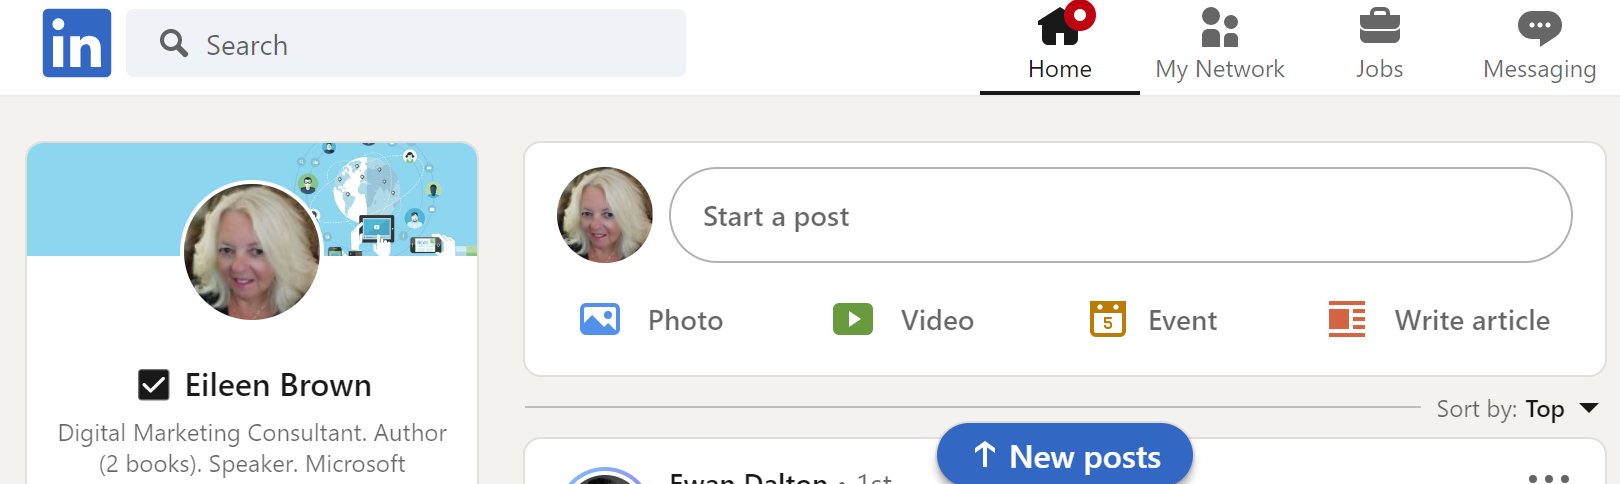 sharing linkedin posts with followers start post screen eileen brown onmsft